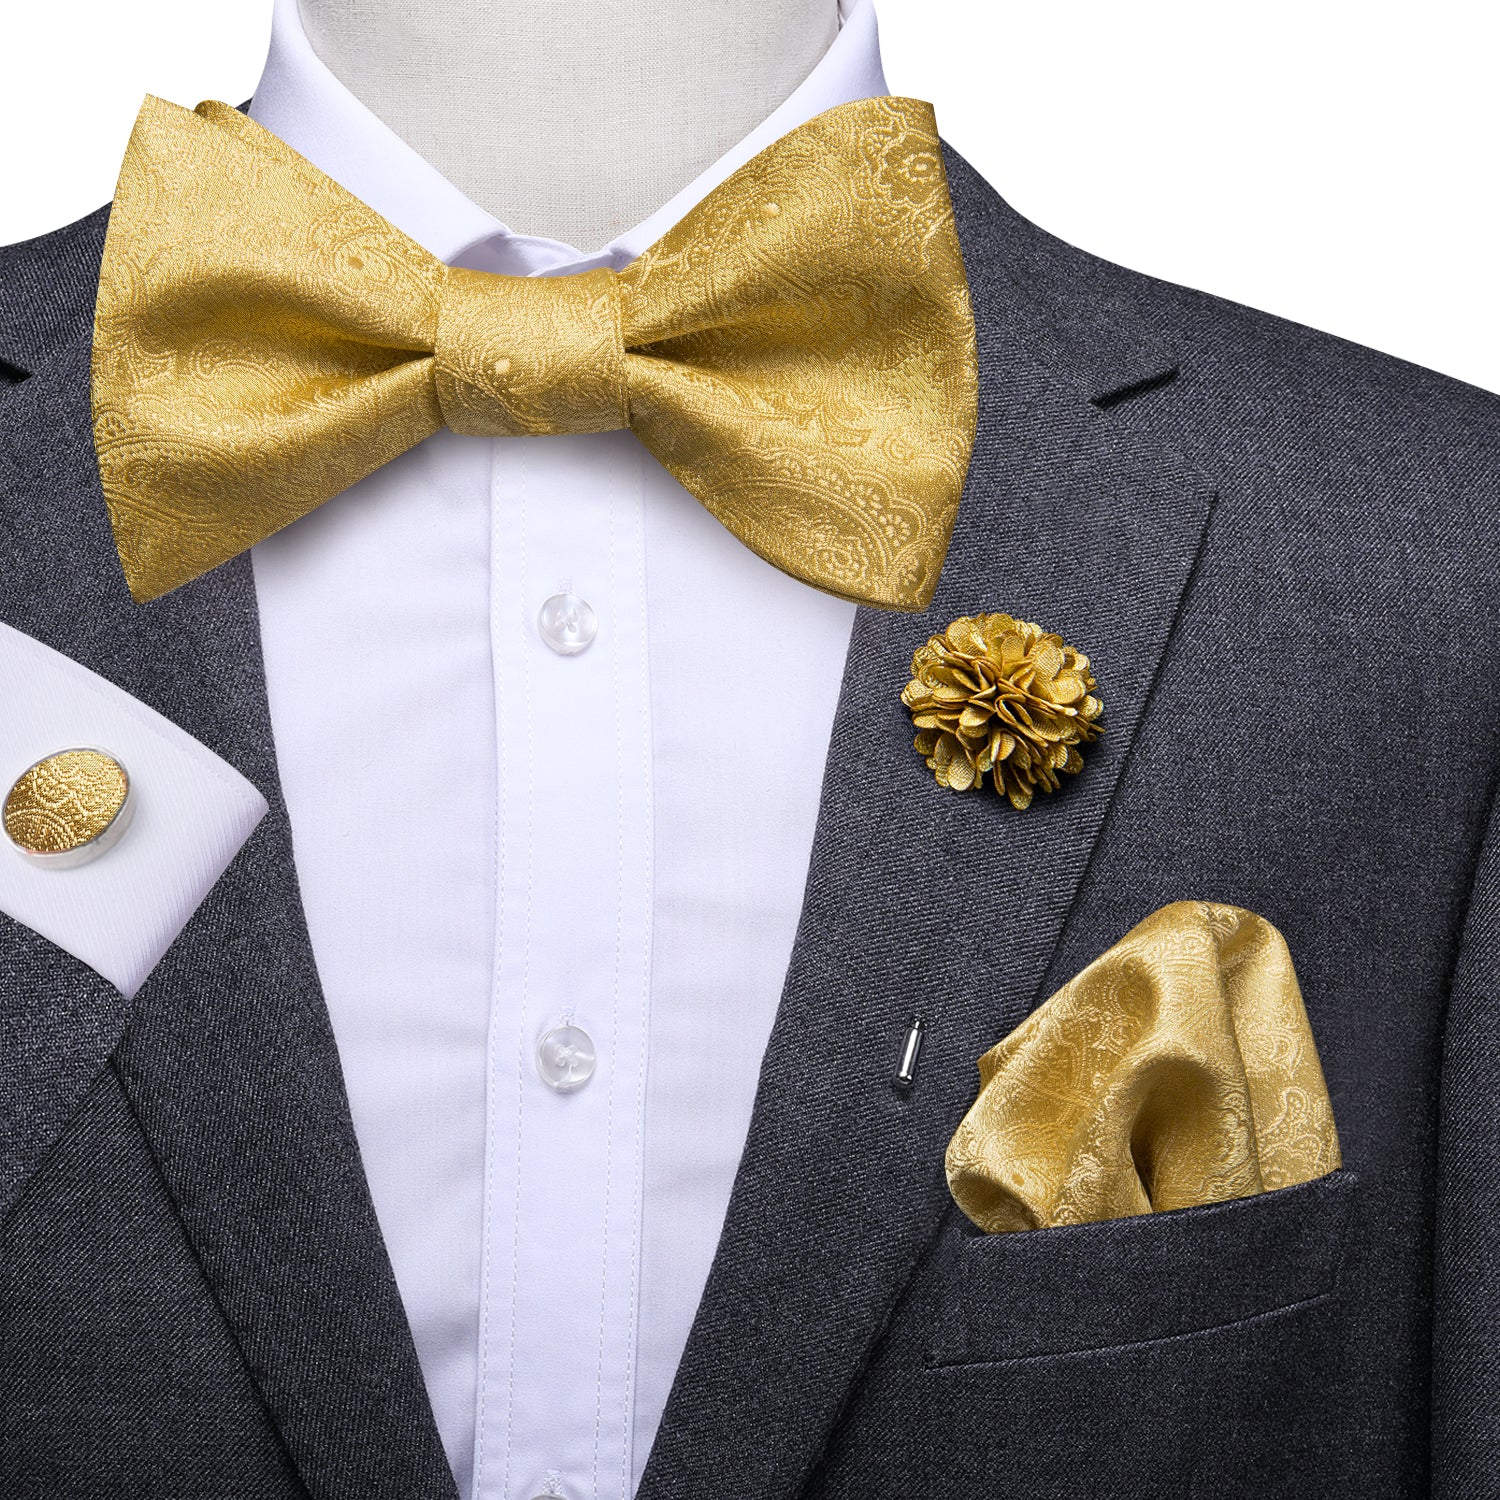 King Gold Solid Self-tied Bow Tie Pocket Square Cufflinks Pin Set